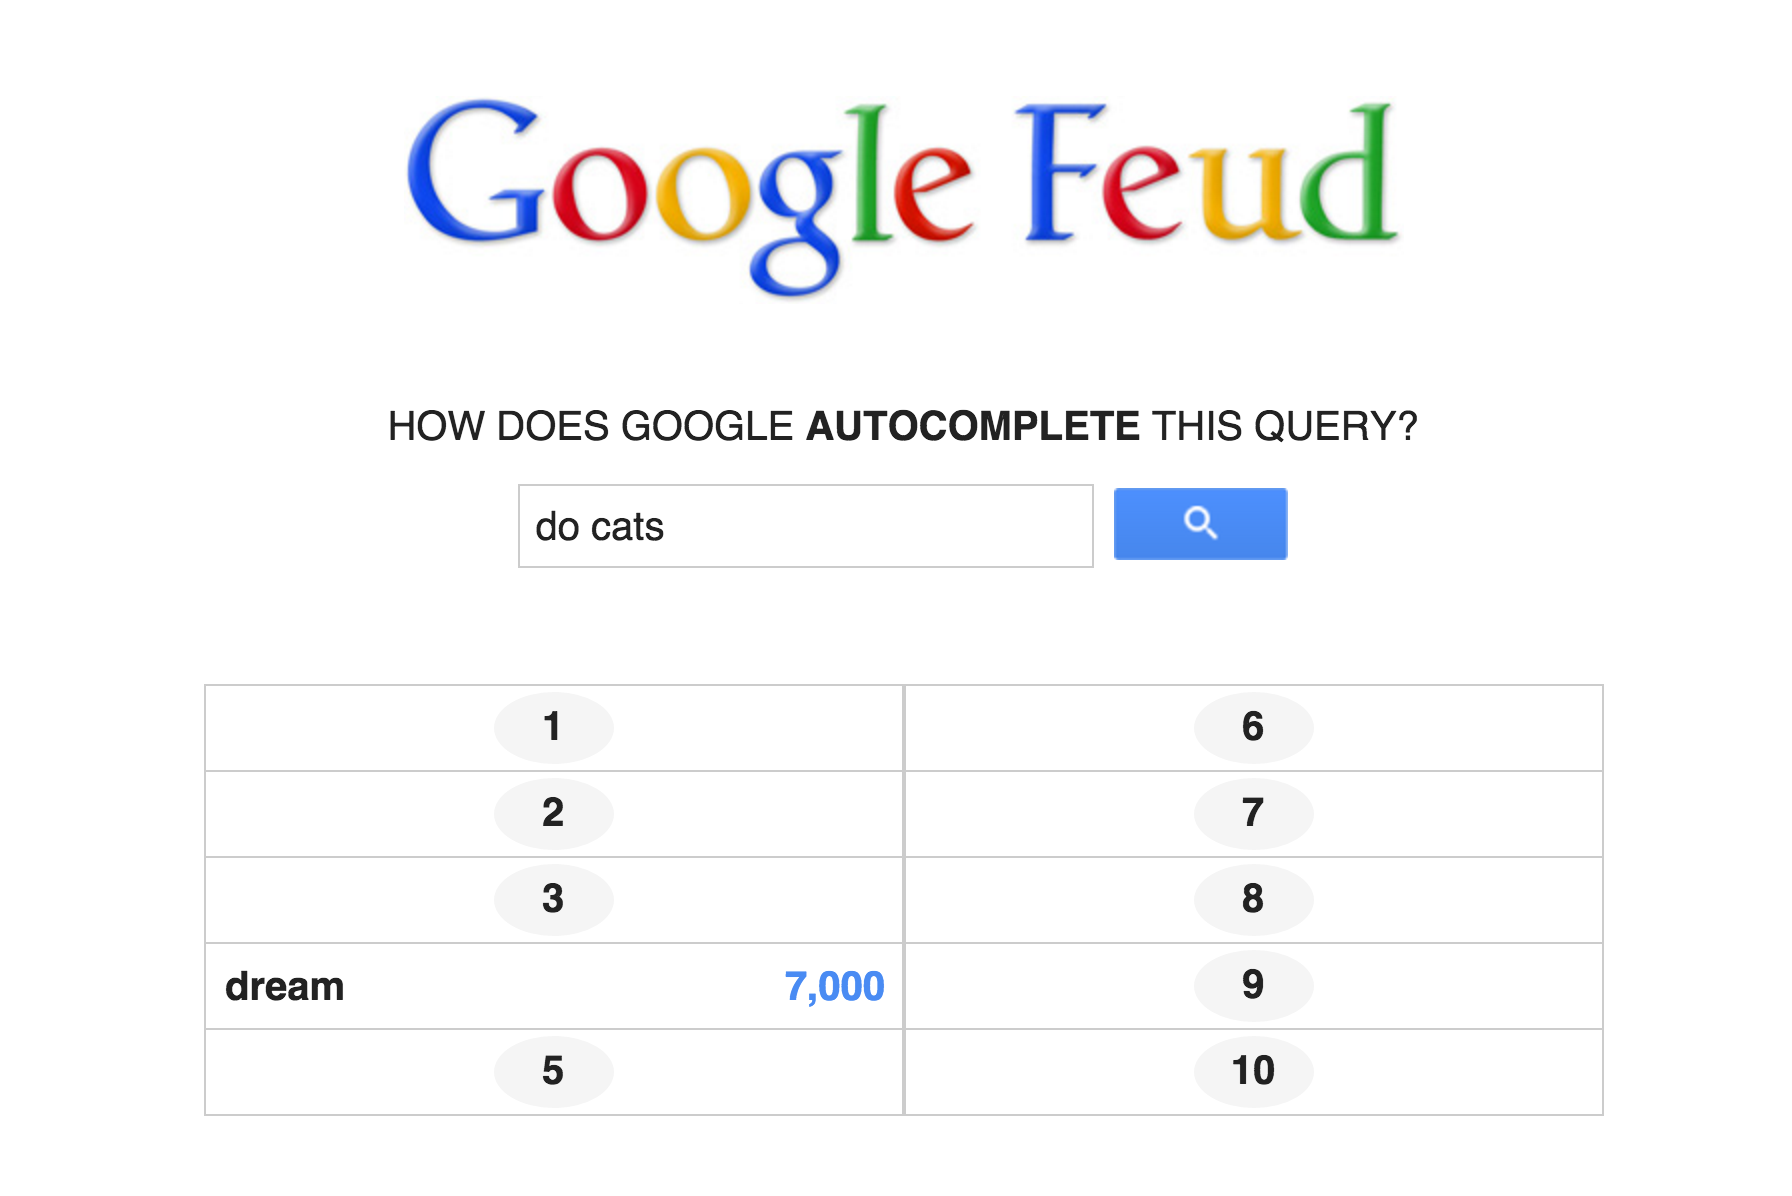 emily schuch on X: I just found out about Google Feud and now I'm